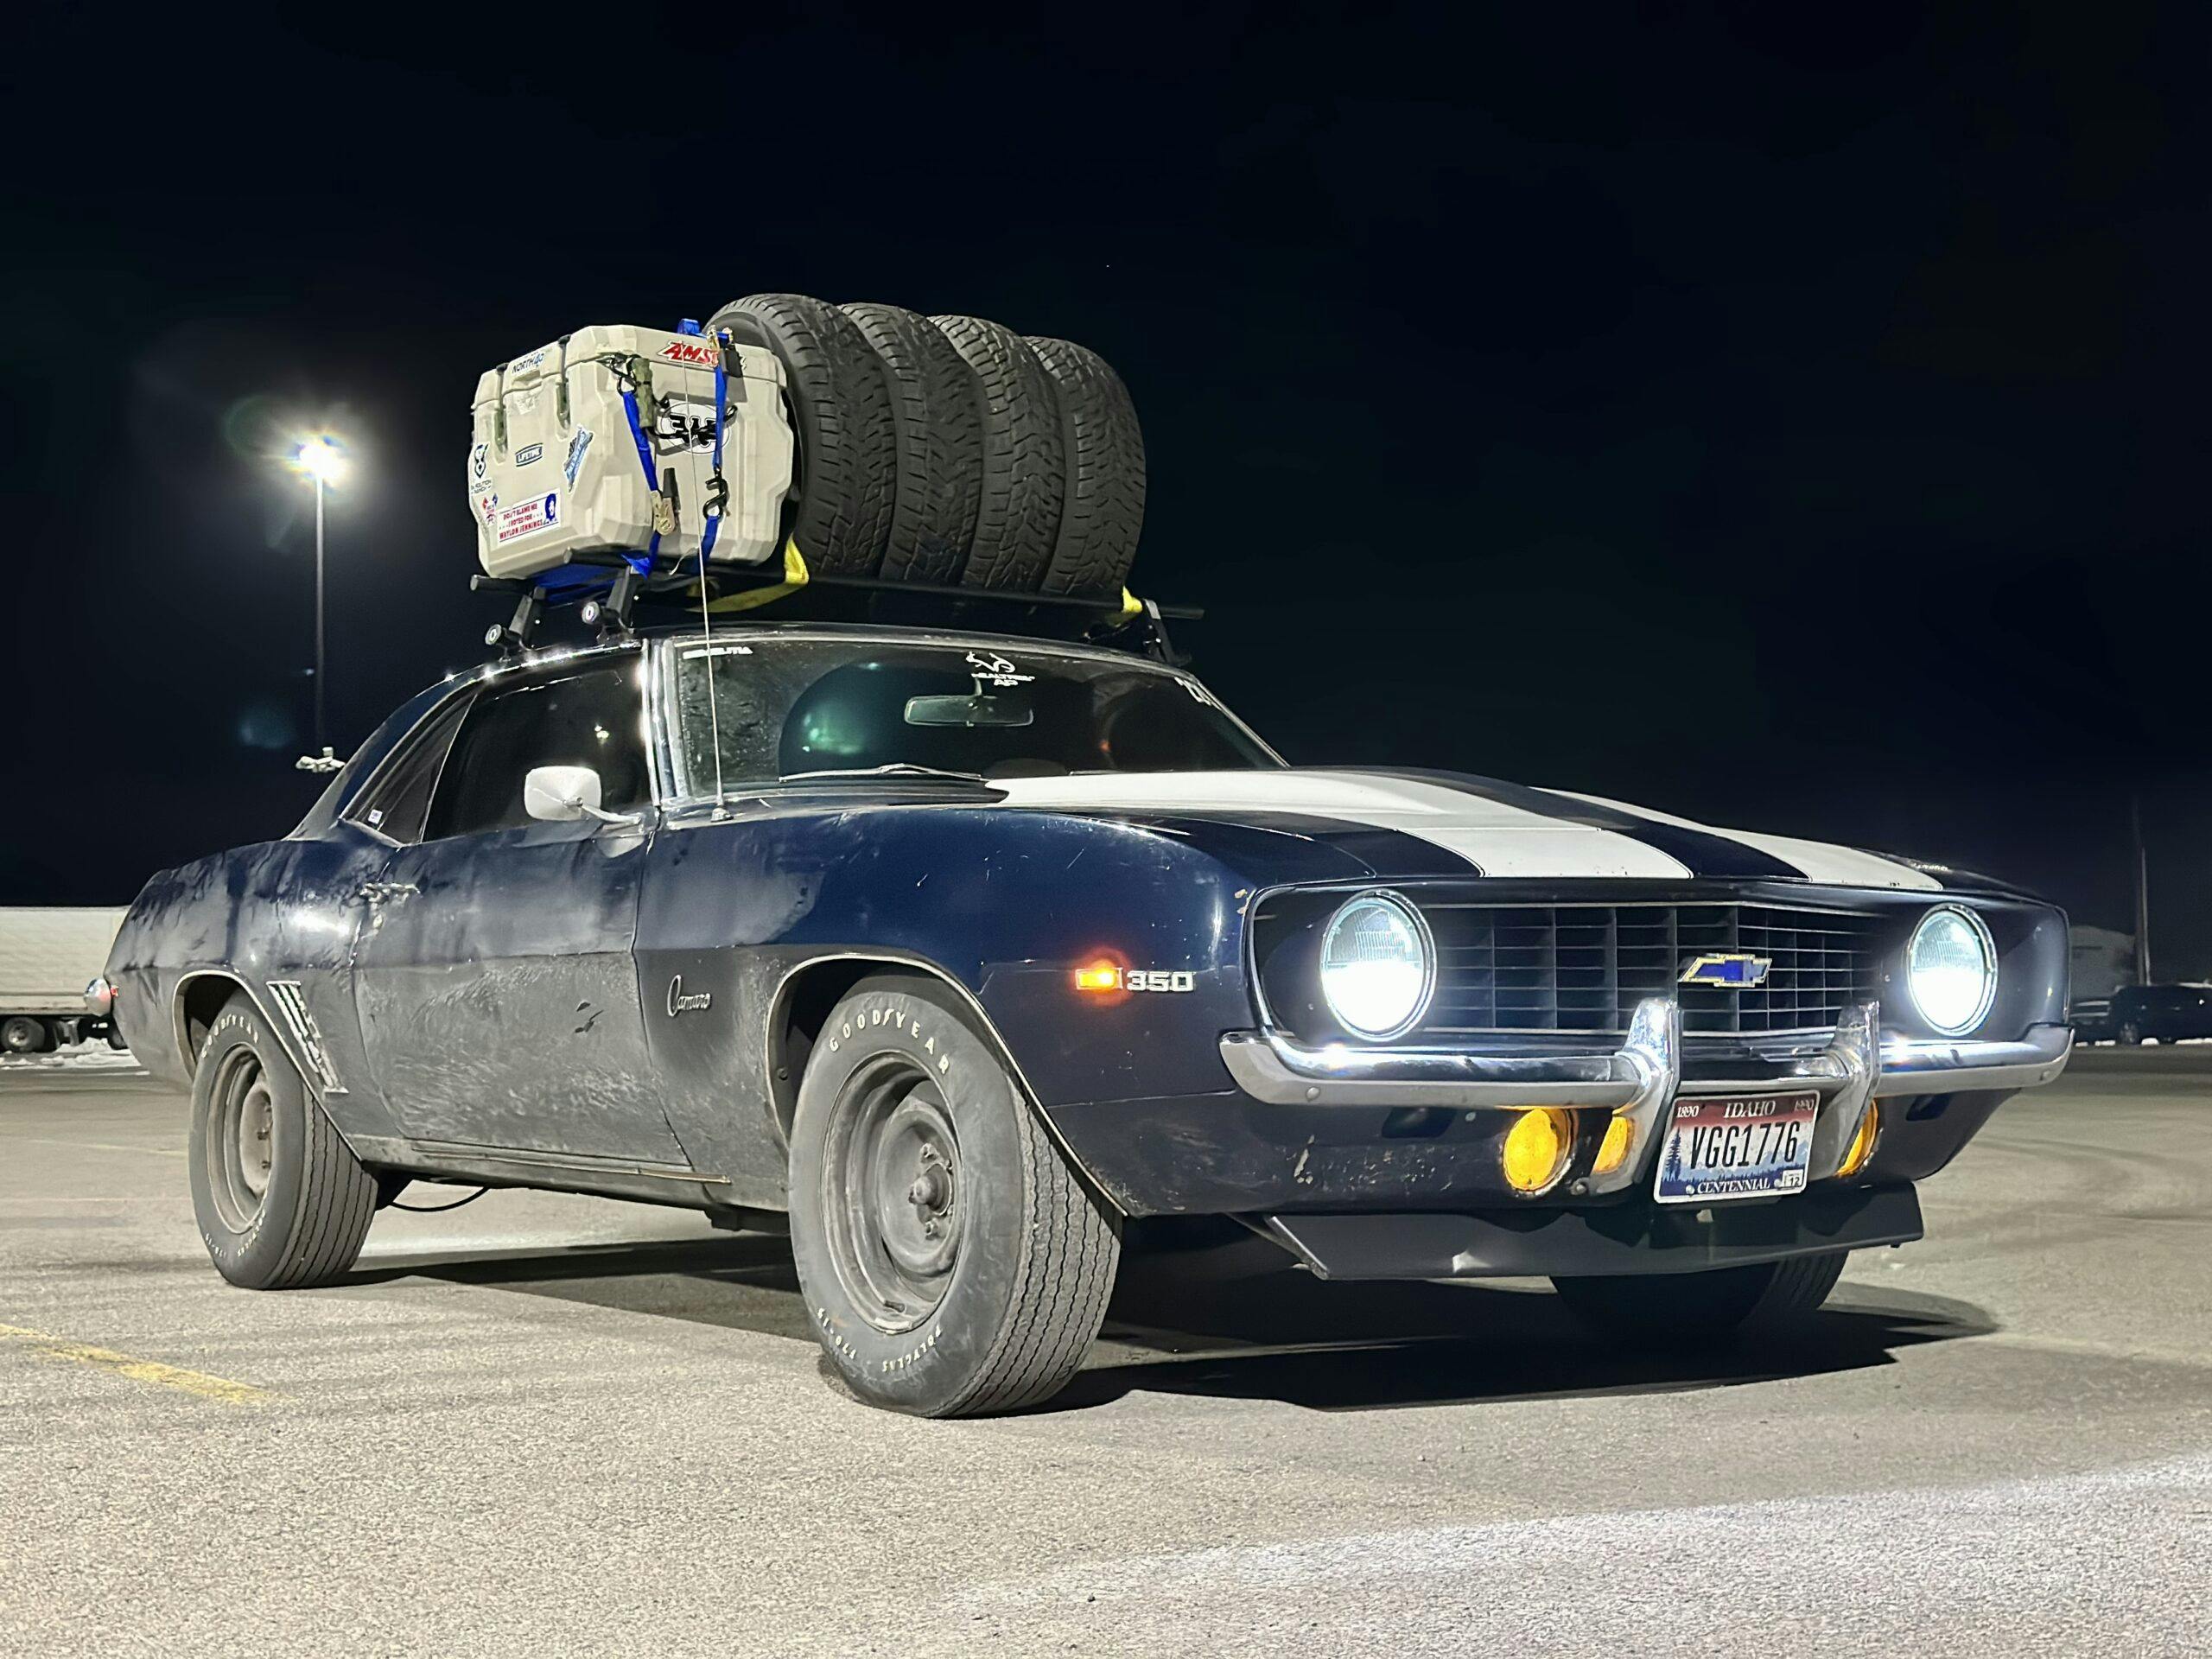 200,000-mile 1969 Camaro is proof your car is bored - Hagerty Media